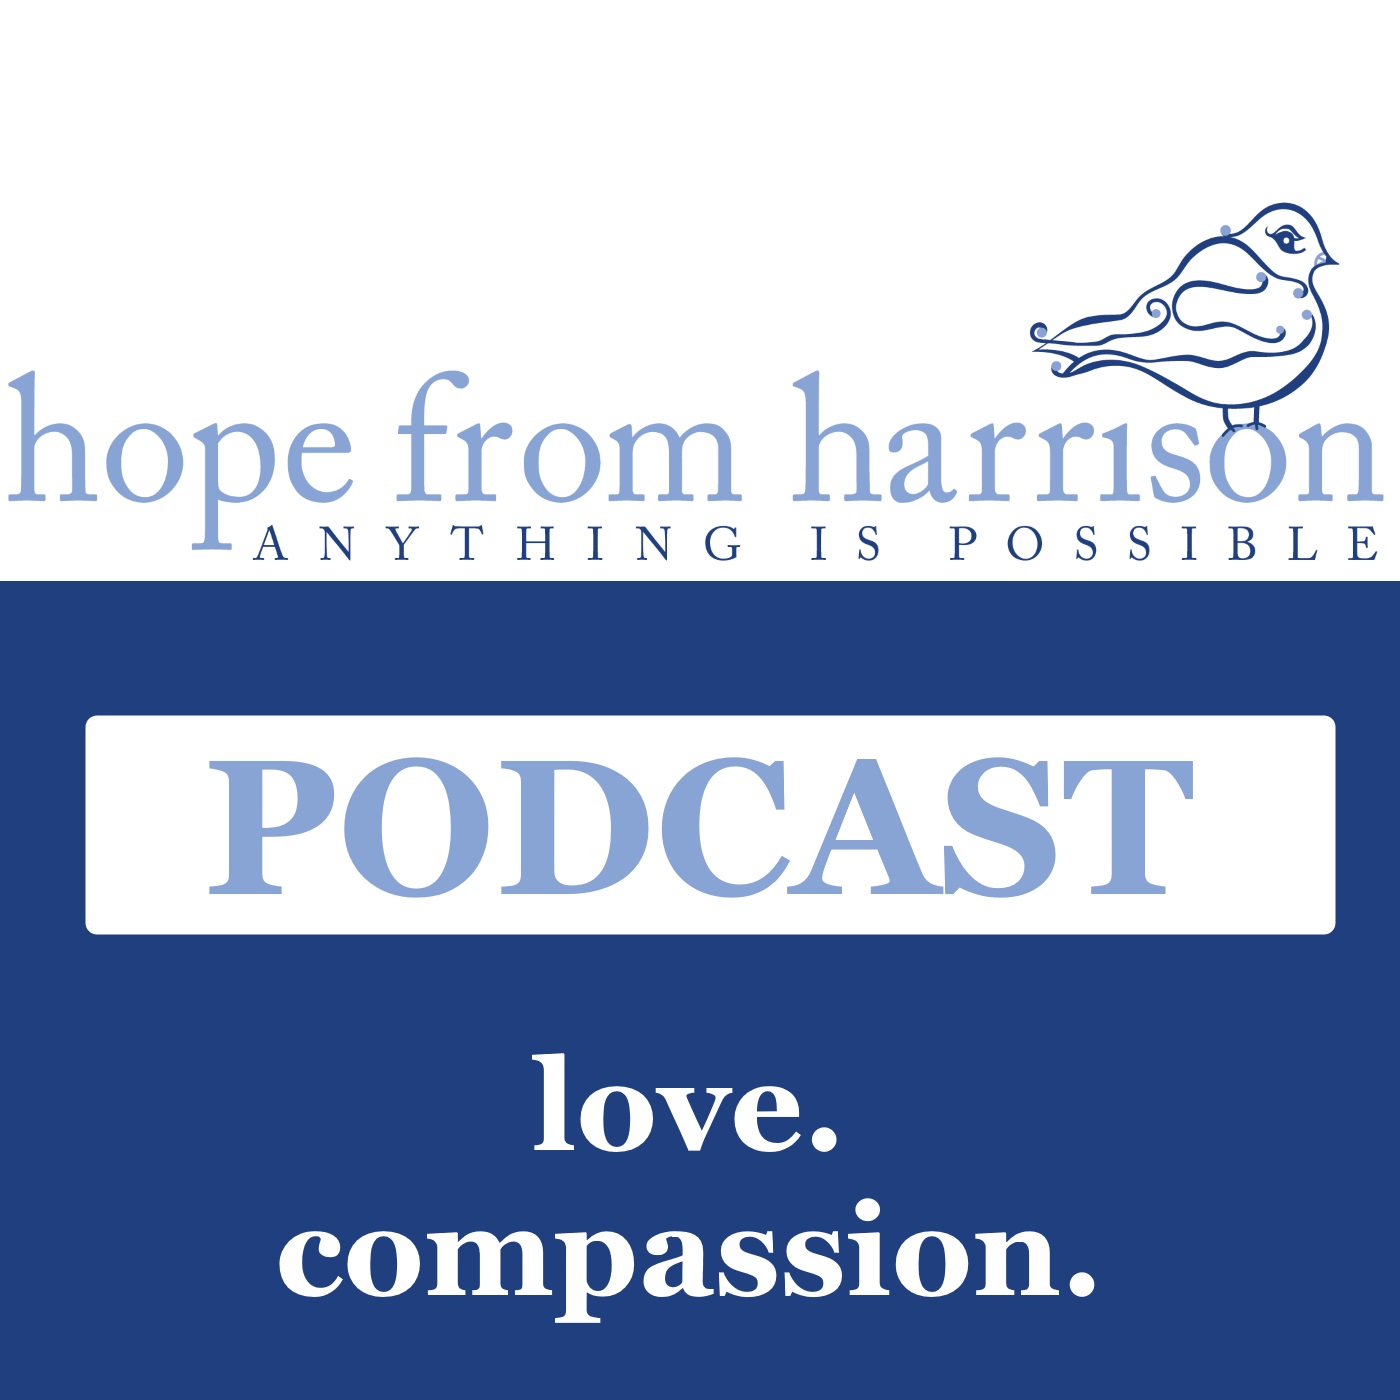 The Hope From Harrison Podcast: Non-Profit | Children With Critical Needs